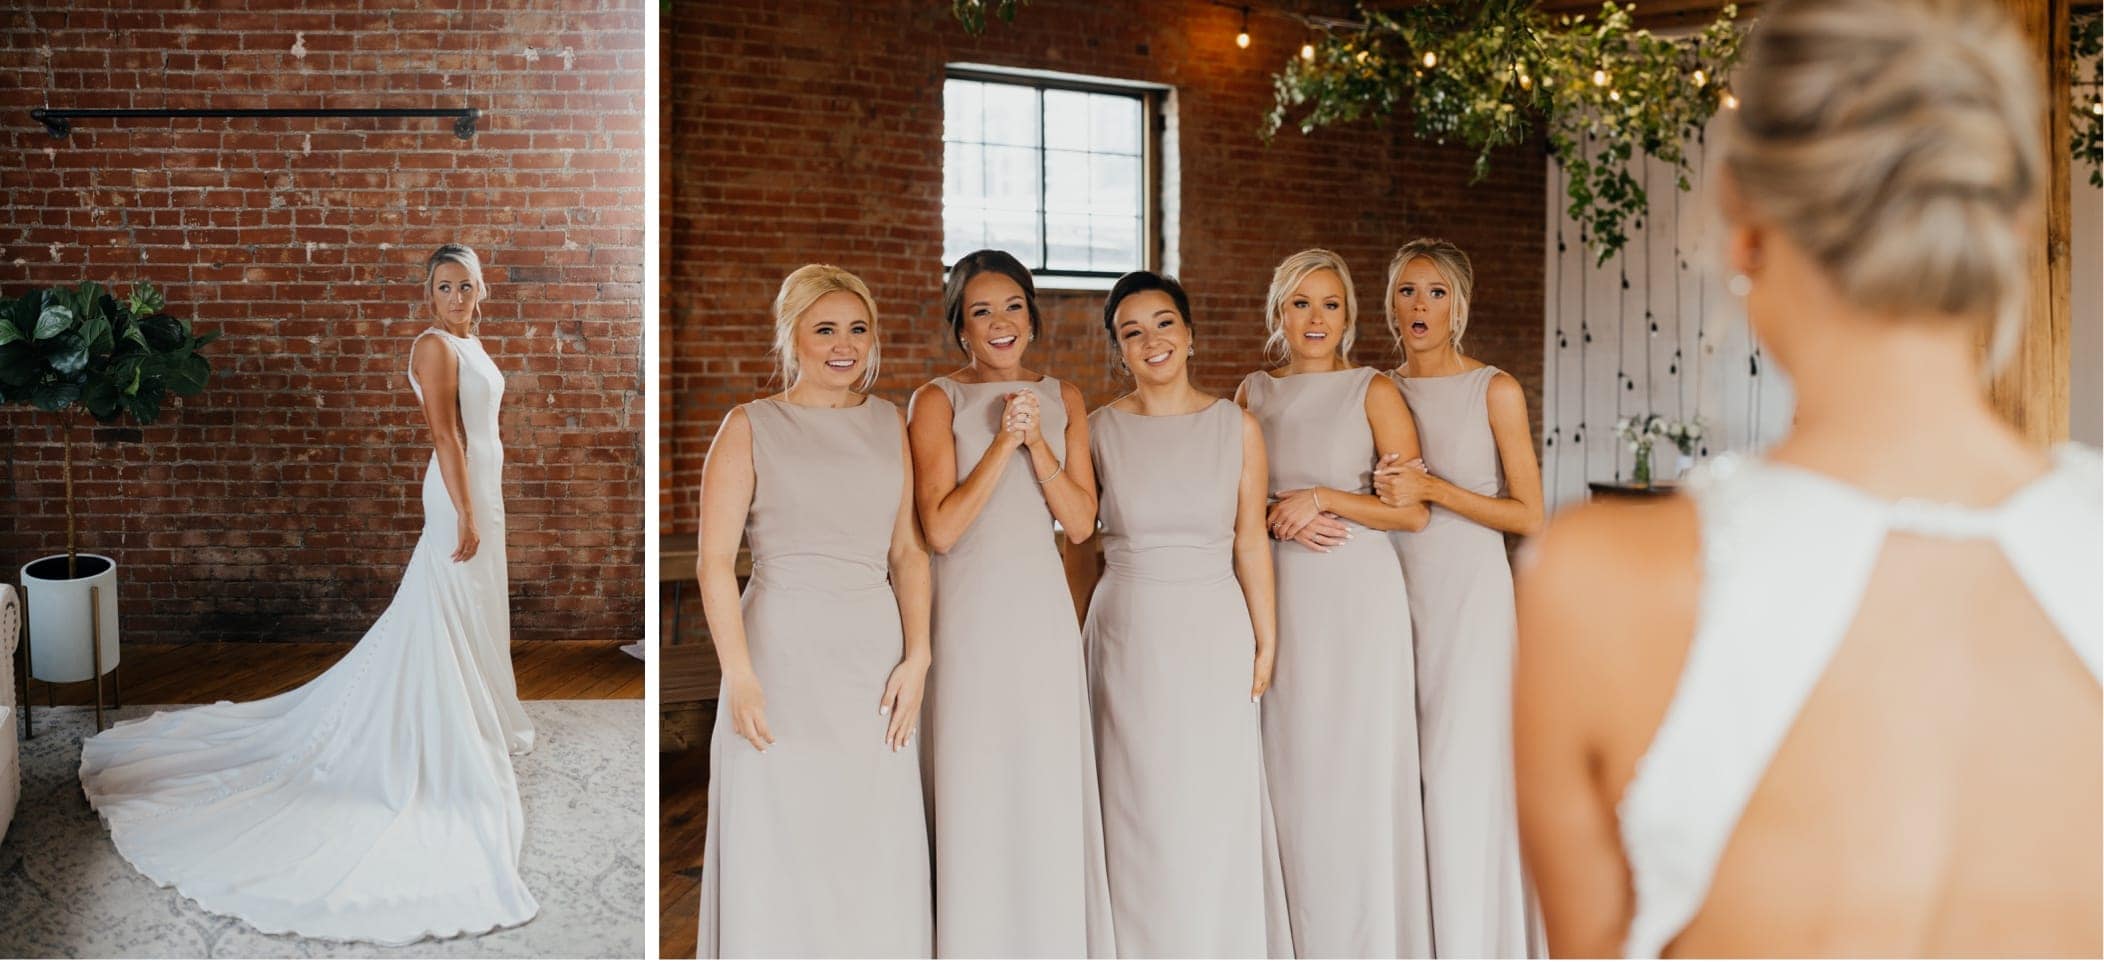 13 bride and bridesmaids first look